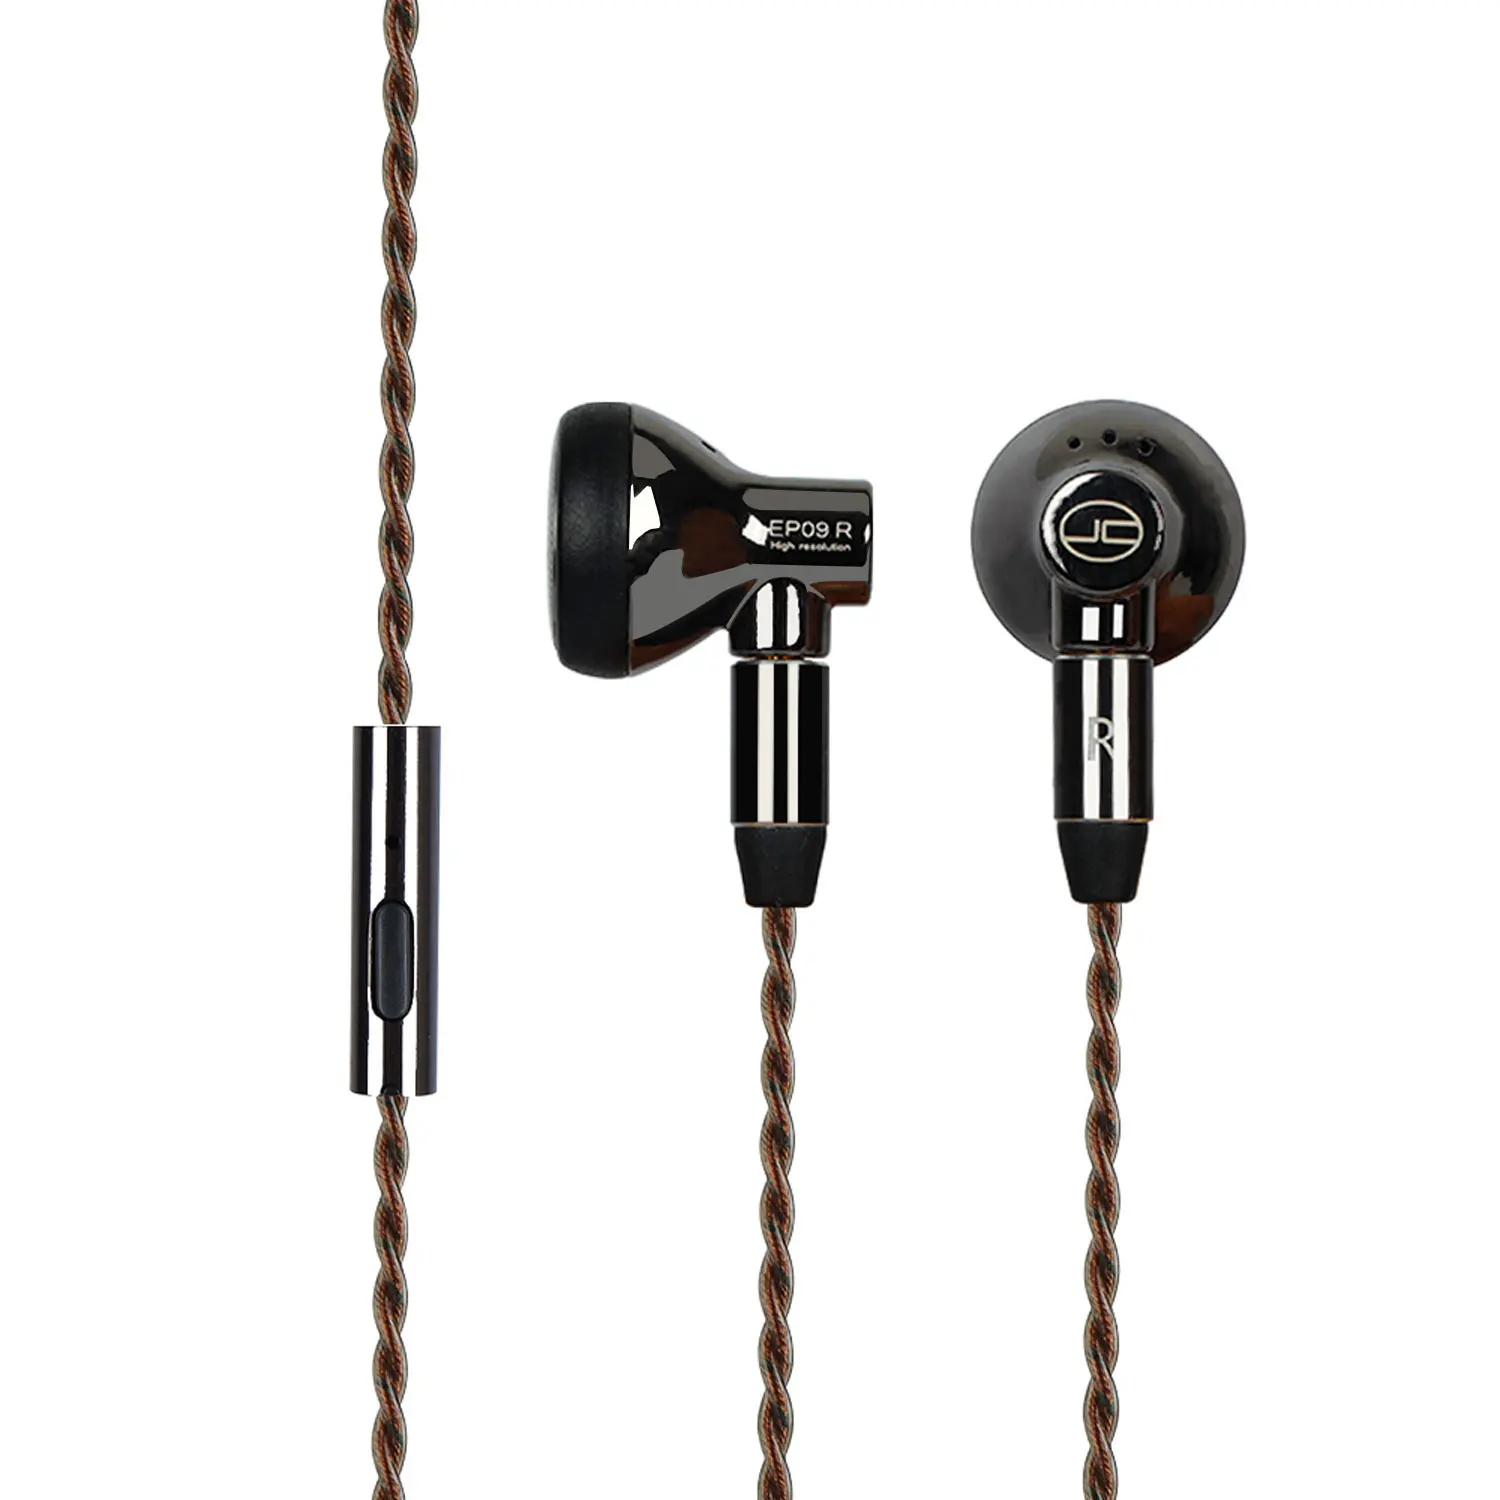 

JCALLY EP05 EP08 EP09 Flat Head Earbuds 5N High Purity OFC Earphone Cable With MMCX Replaceable cable